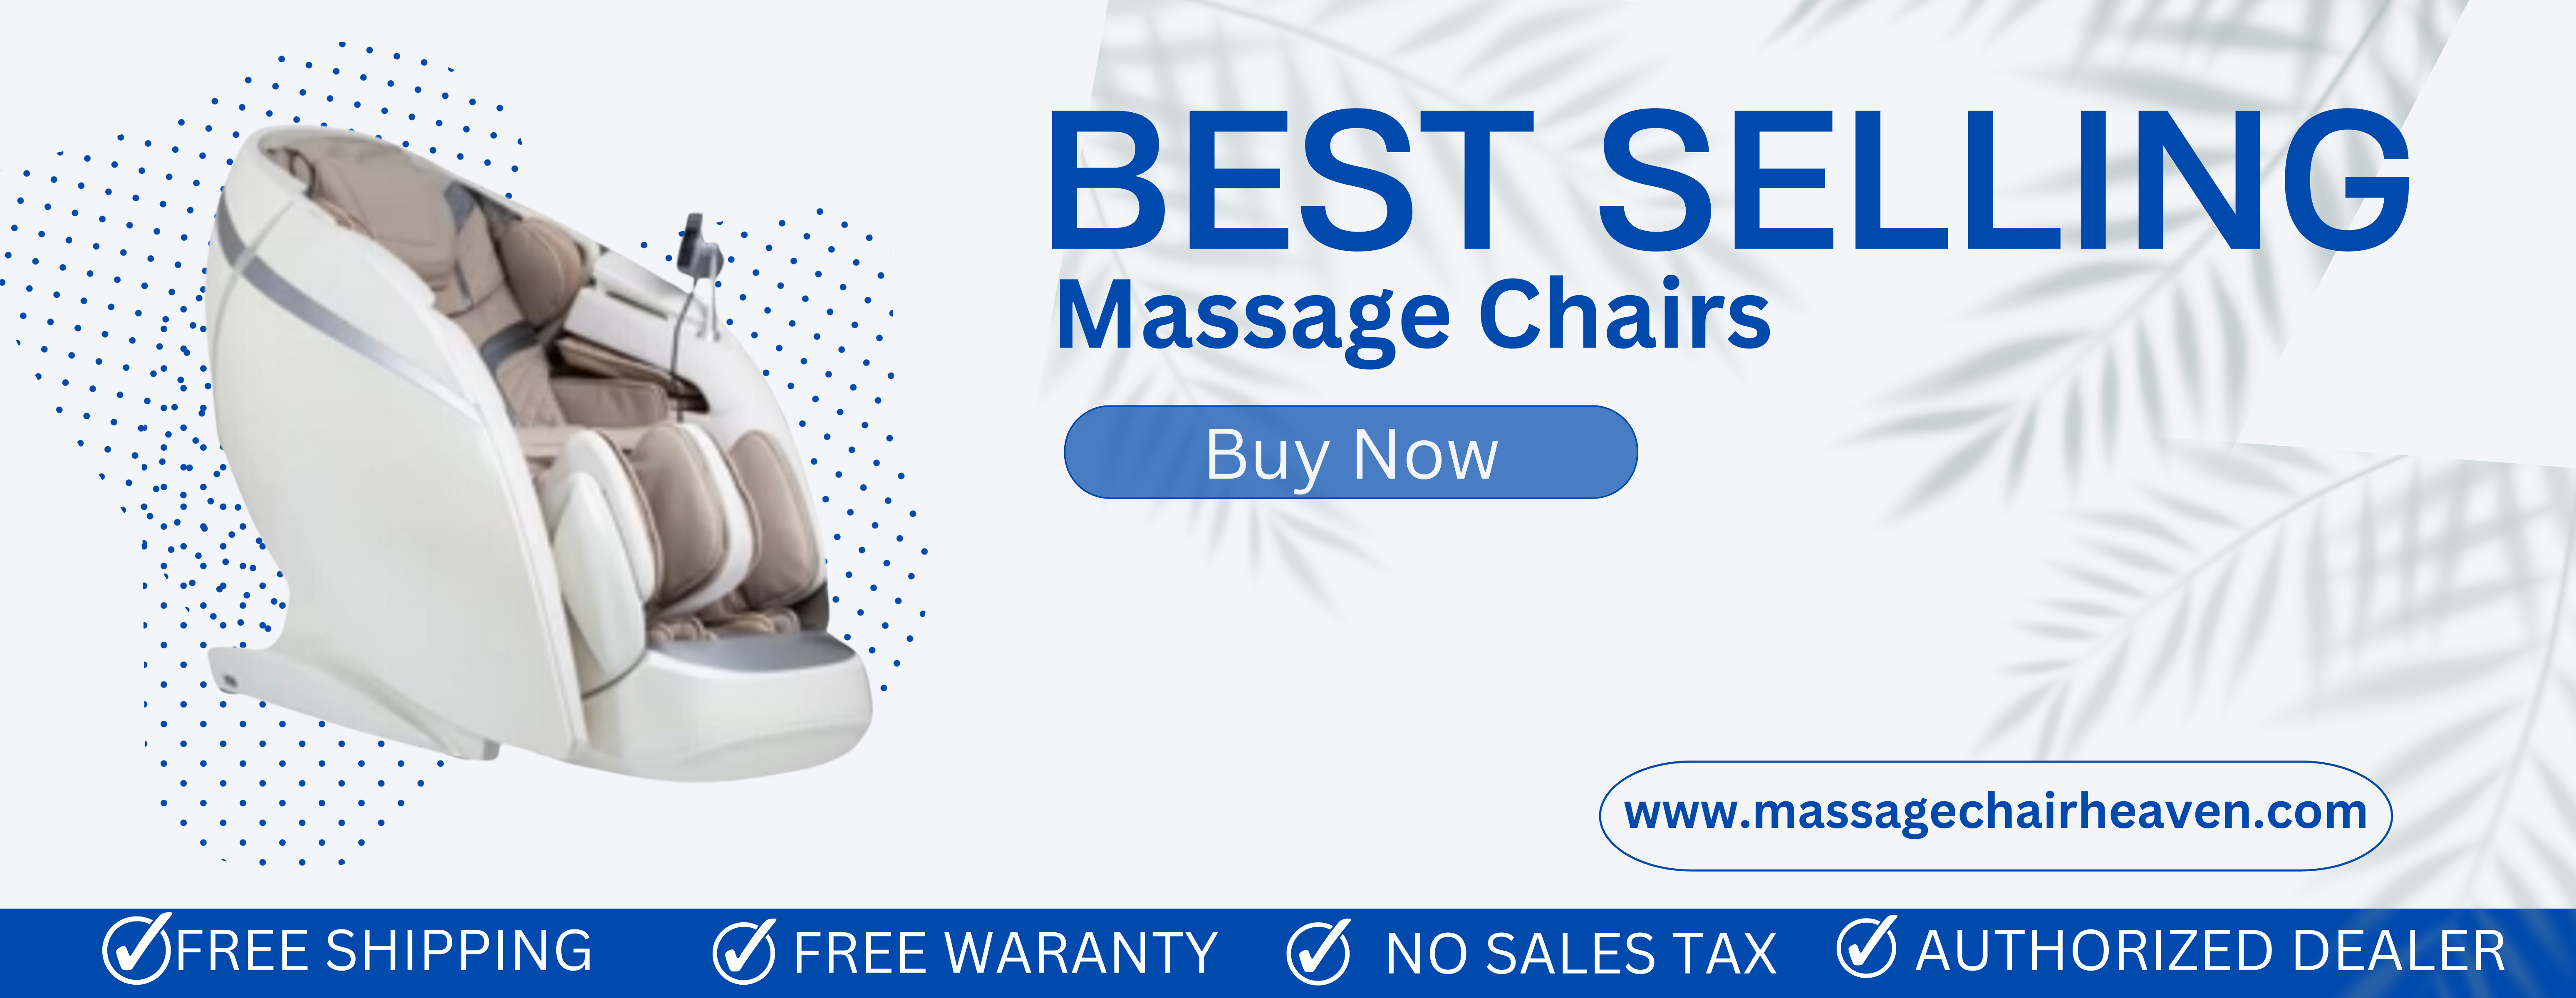 Best Selling Massage Chairs